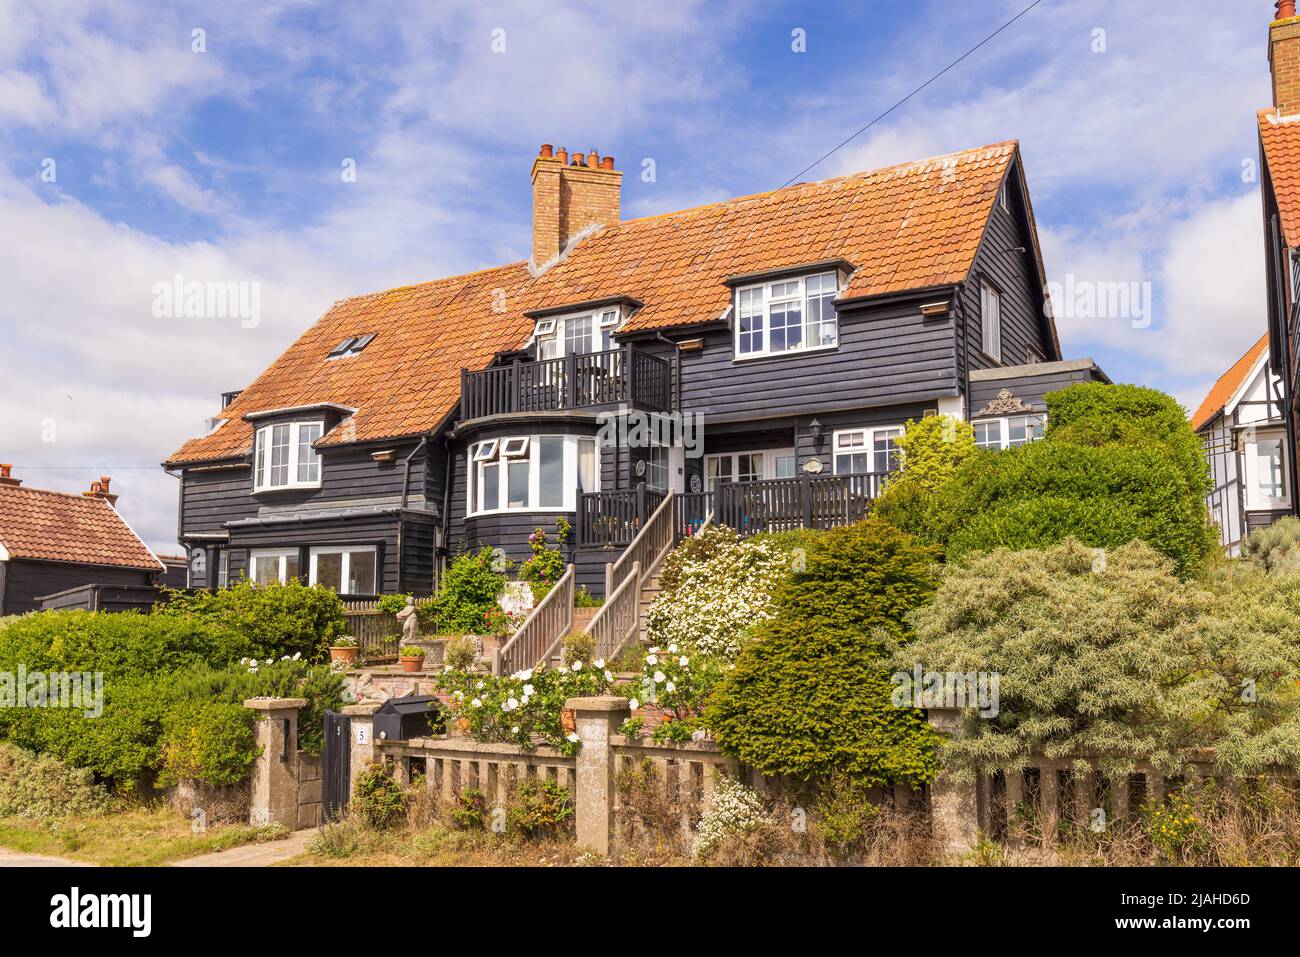 Attractive timber clad houses in the village of Thorpeness, Suffolk. UK Stock Photo